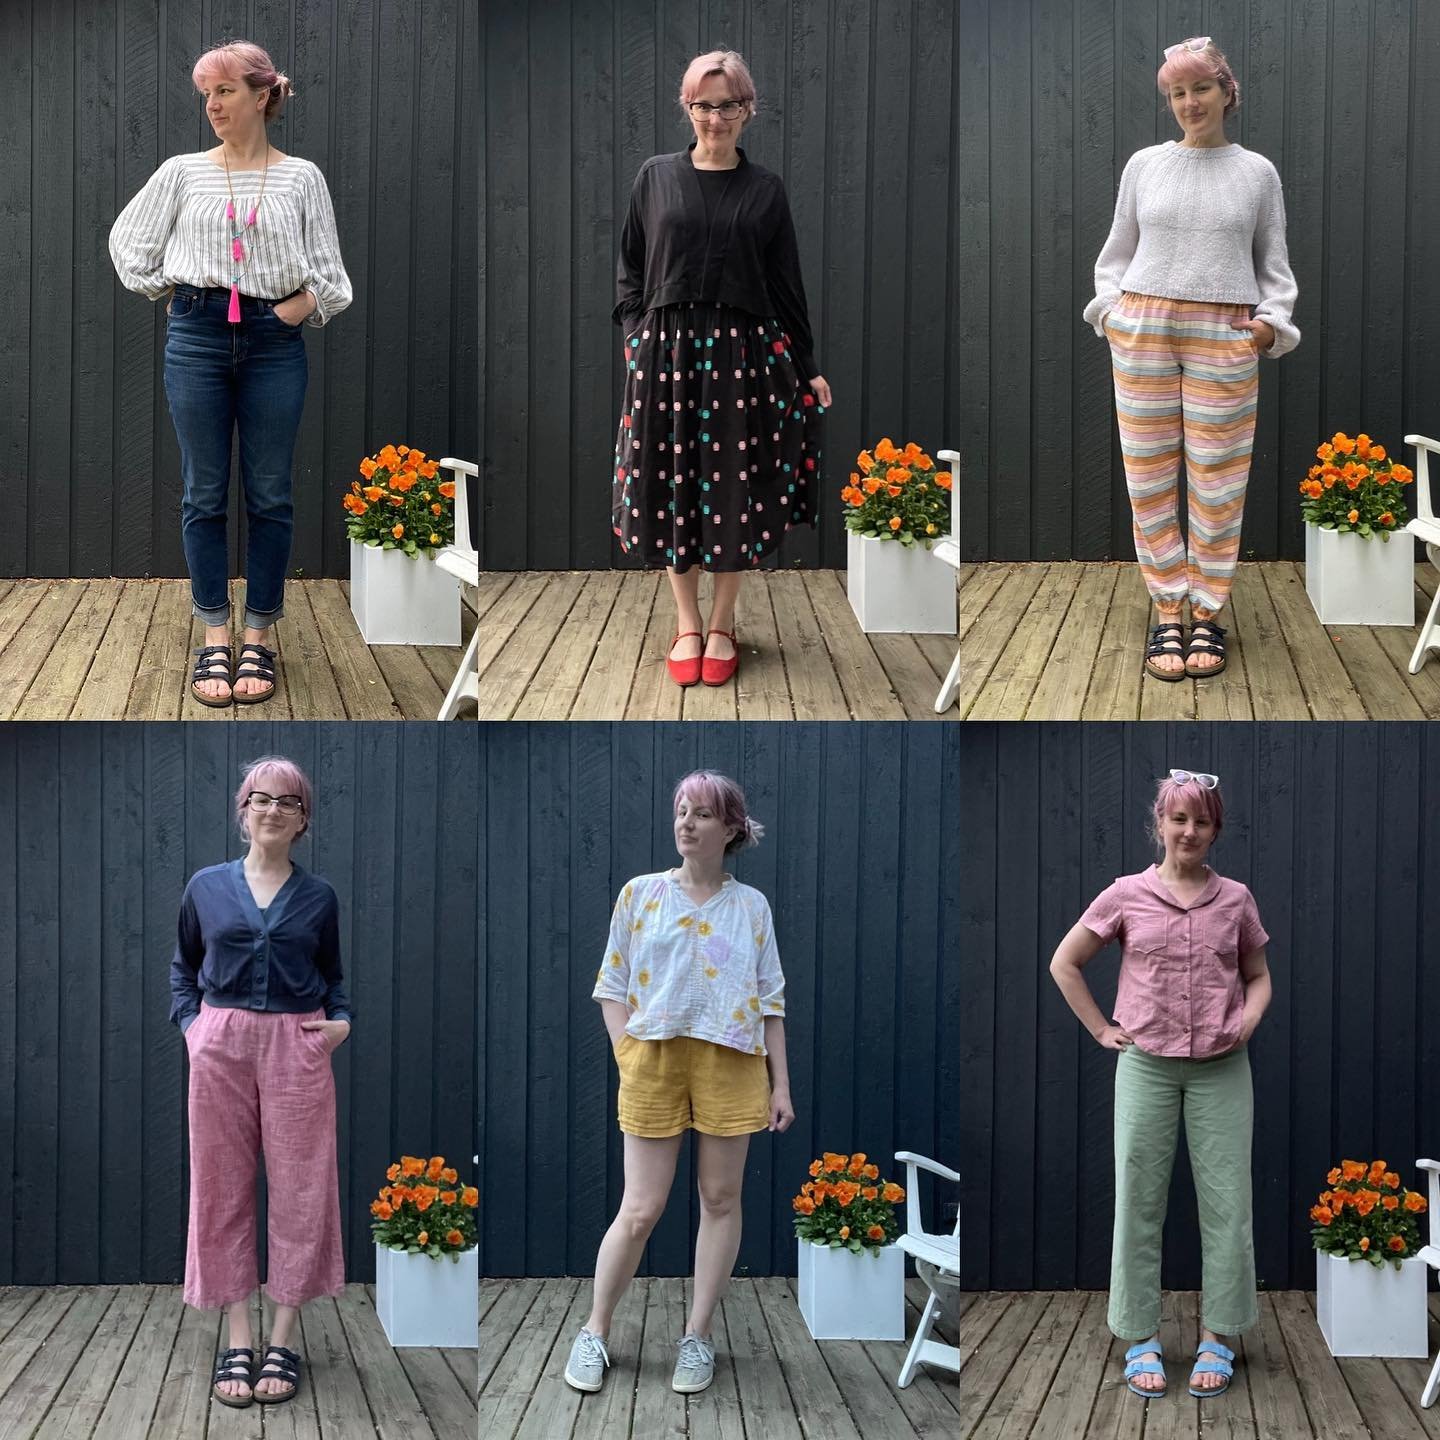 MMM Week 3 Outfits
💕
(Top row, L to R)
Striped Ruby + Garnet mashup
Black Citrine + Cleo skirt
Sunday Sweater + Warp and Weft striped Luna pants 
(Bottom row, L to R):
Navy Citrine + Rose pants
Matcha top @sewliberated + gold Rose shorts
Joanie top 